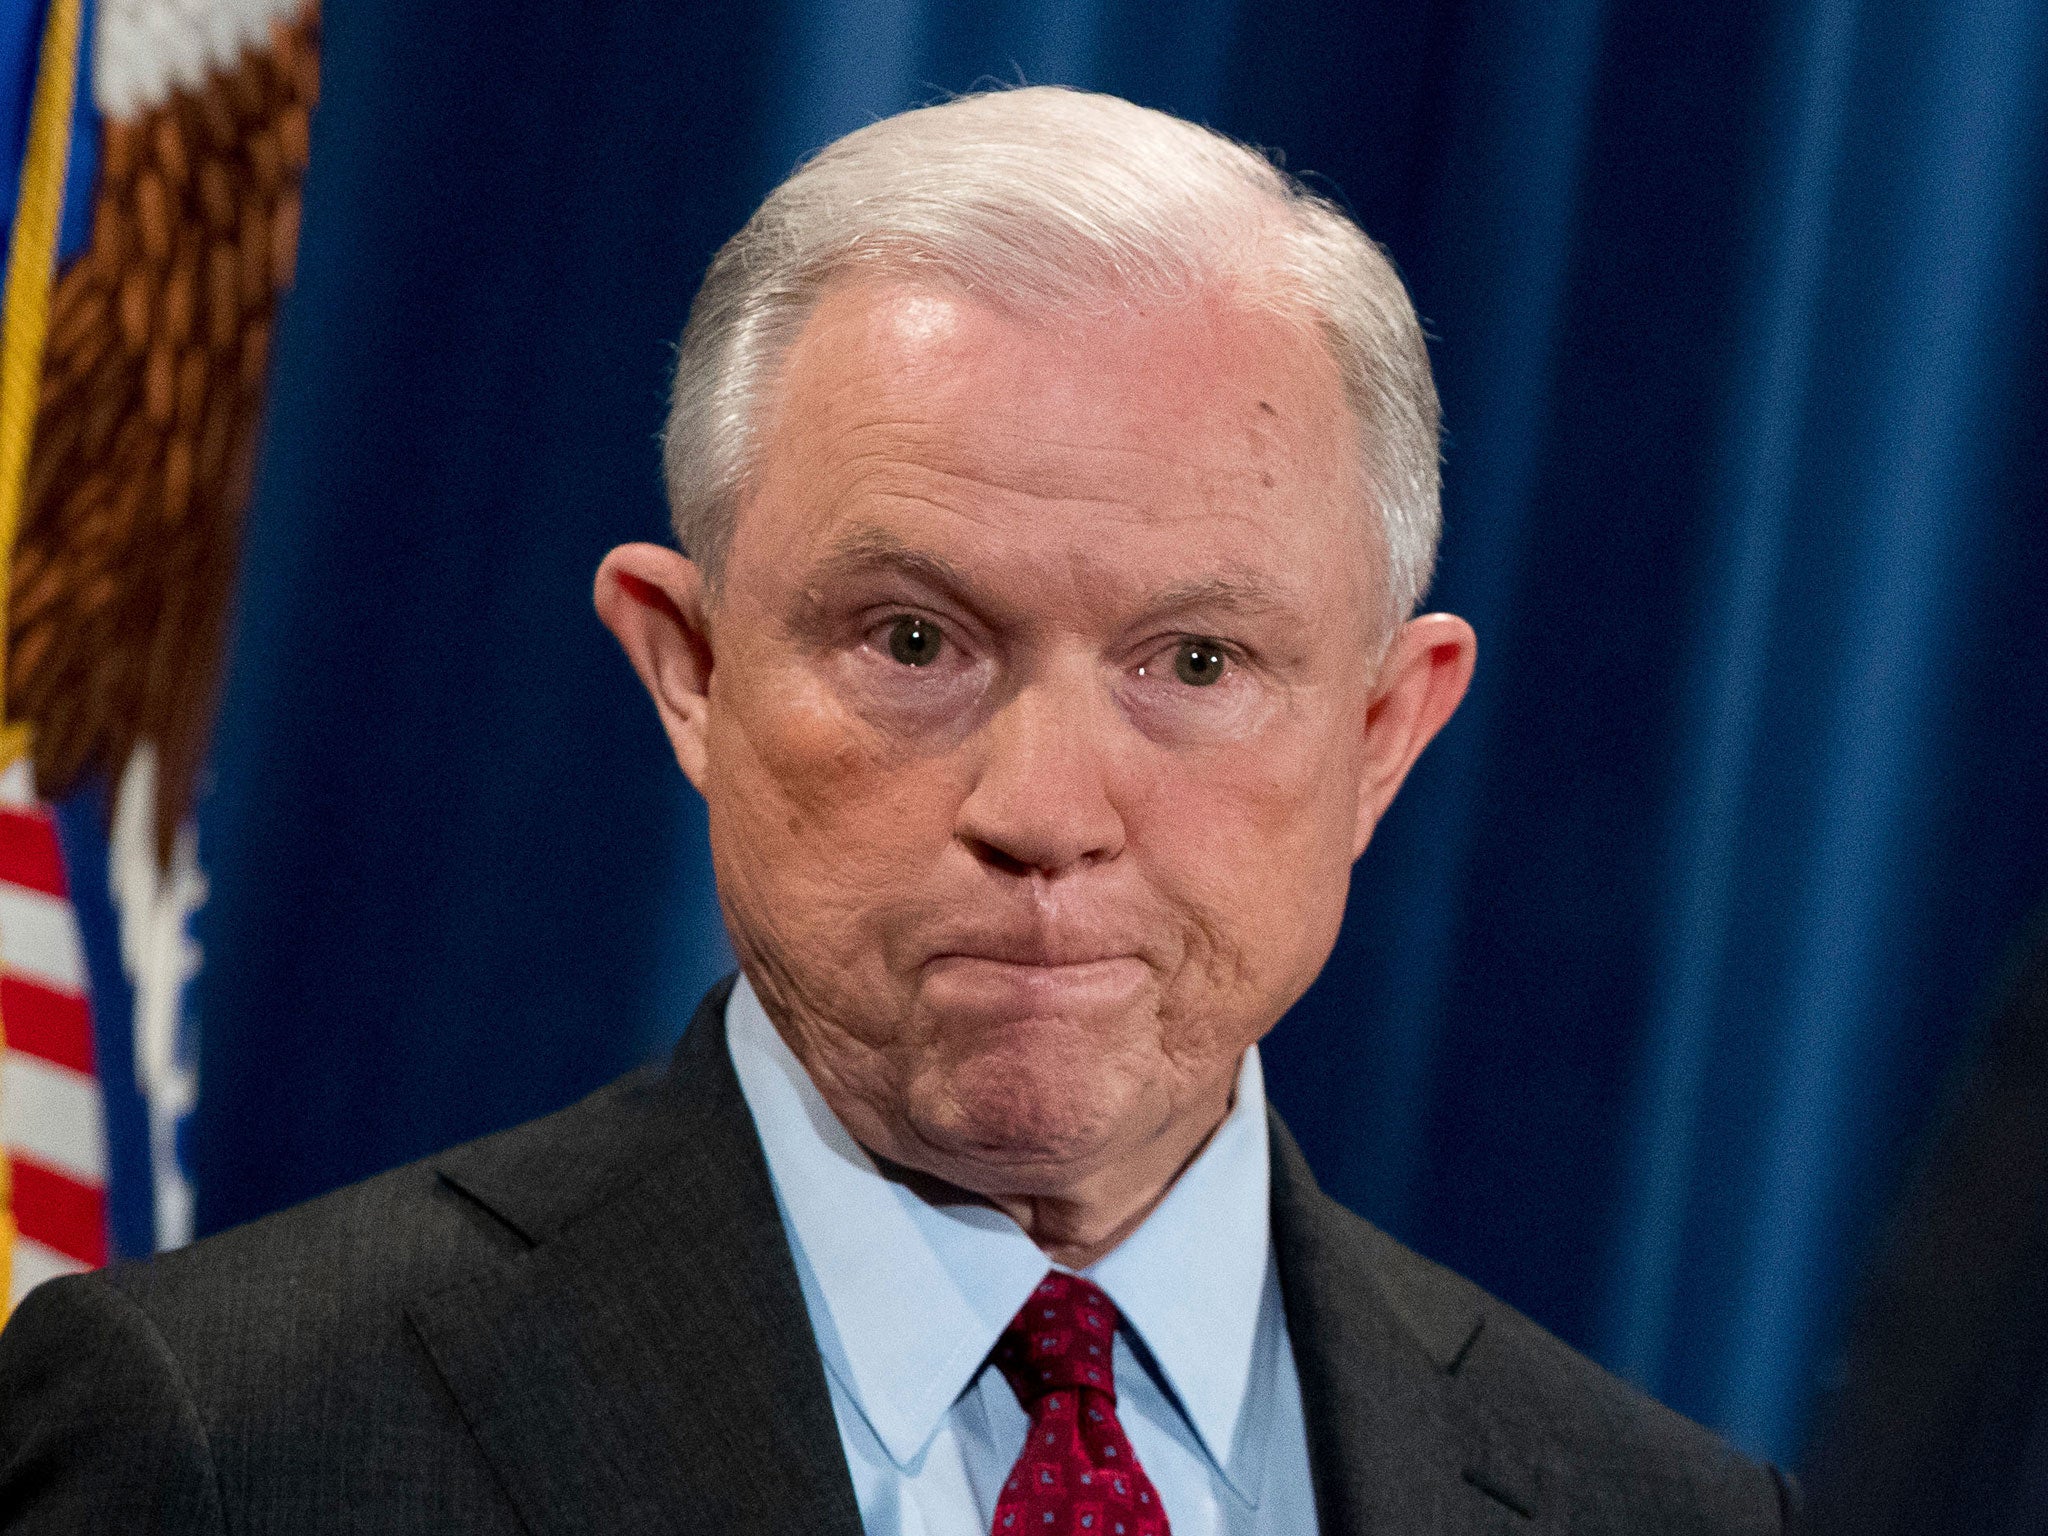 Attorney General Jeff Sessions, whose future is in doubt after a series of attacks by Donald Trump